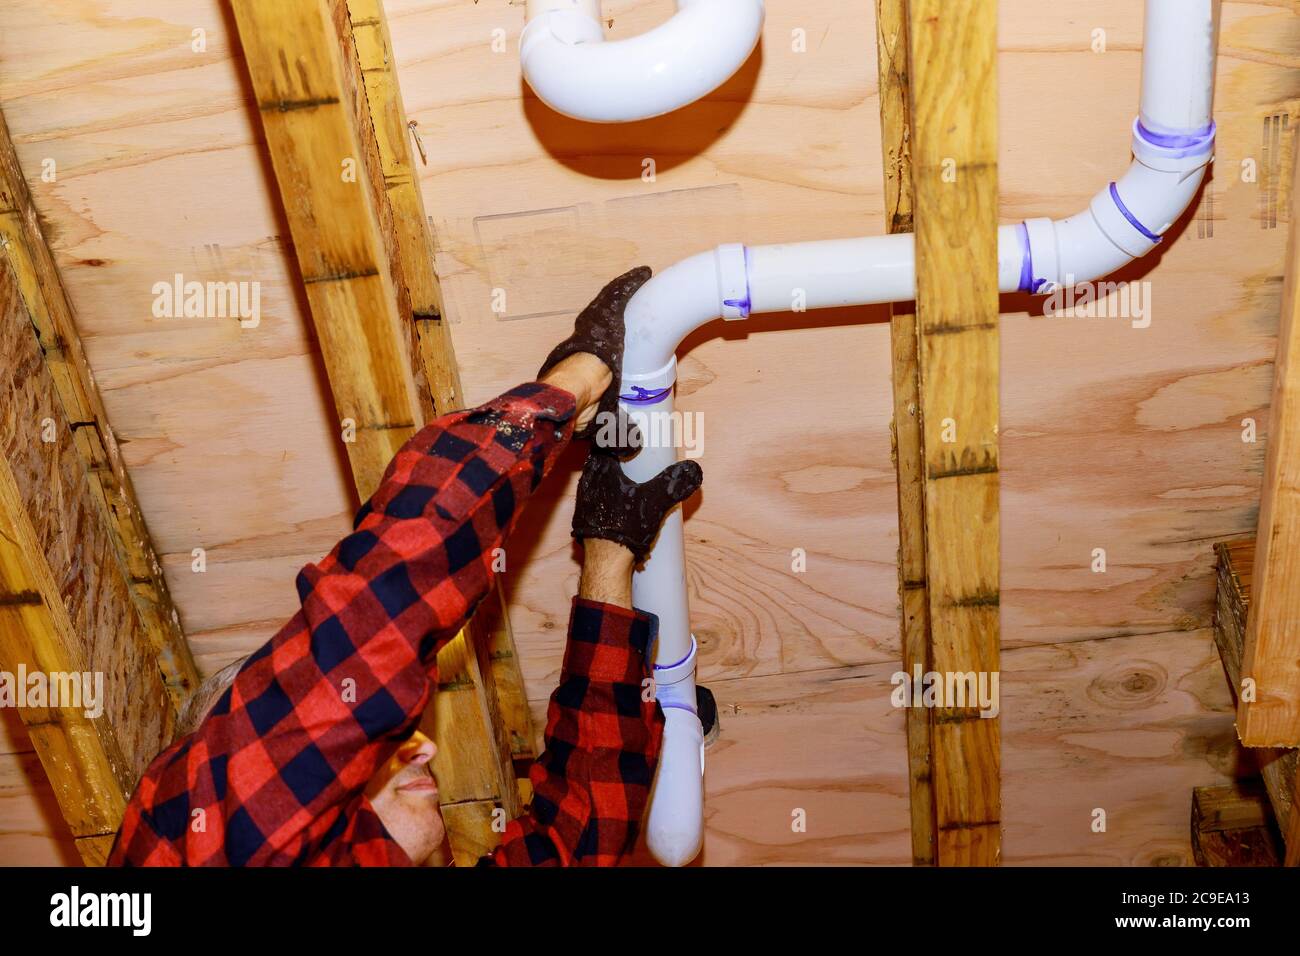 Workers are sewer toilet pipes with PVC joints allows the split the make PVC pipe coming out the other side the buildingceiling beam house. soft focus Stock Photo